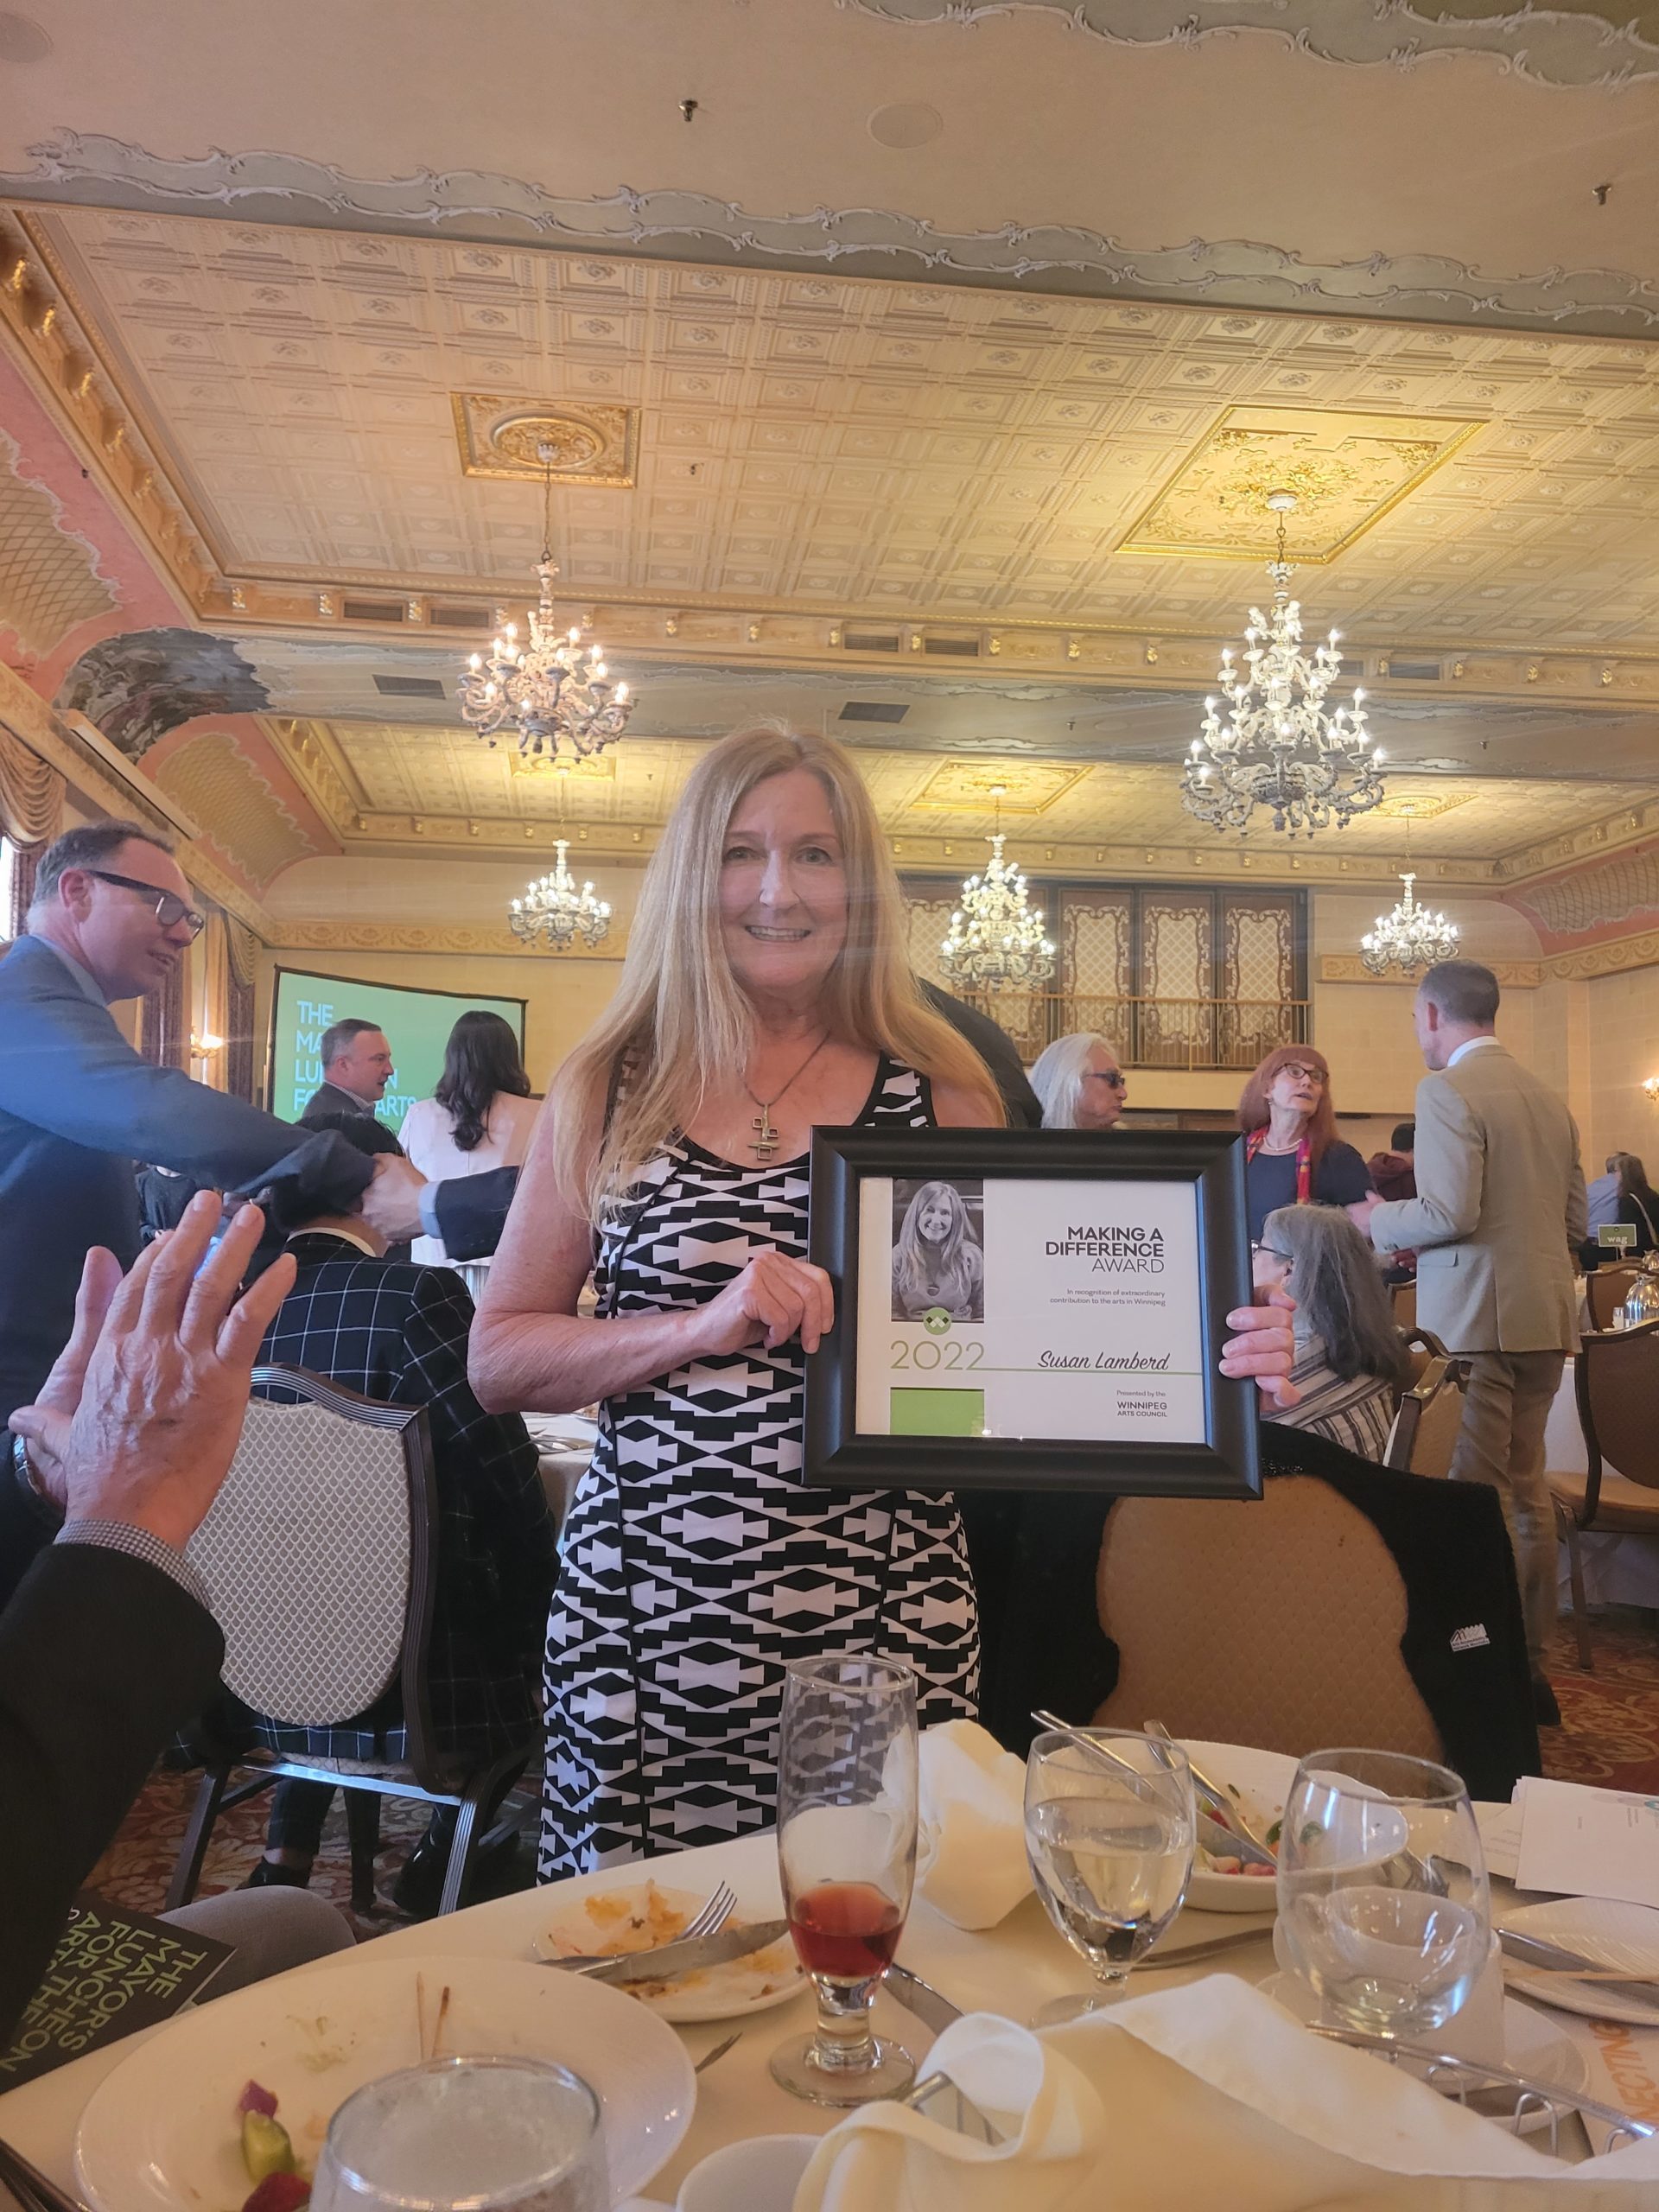 Photograph of Susan Lamberd holding her plaque award. Susan is a white woman in her 50s with long strawberry coloured hair and is wearing a black and white dress. They are both smiling at the camera. In the background you can see many tables and other folks who attended the event. The space is very fancy with chandeliers and a goldish ceiling.